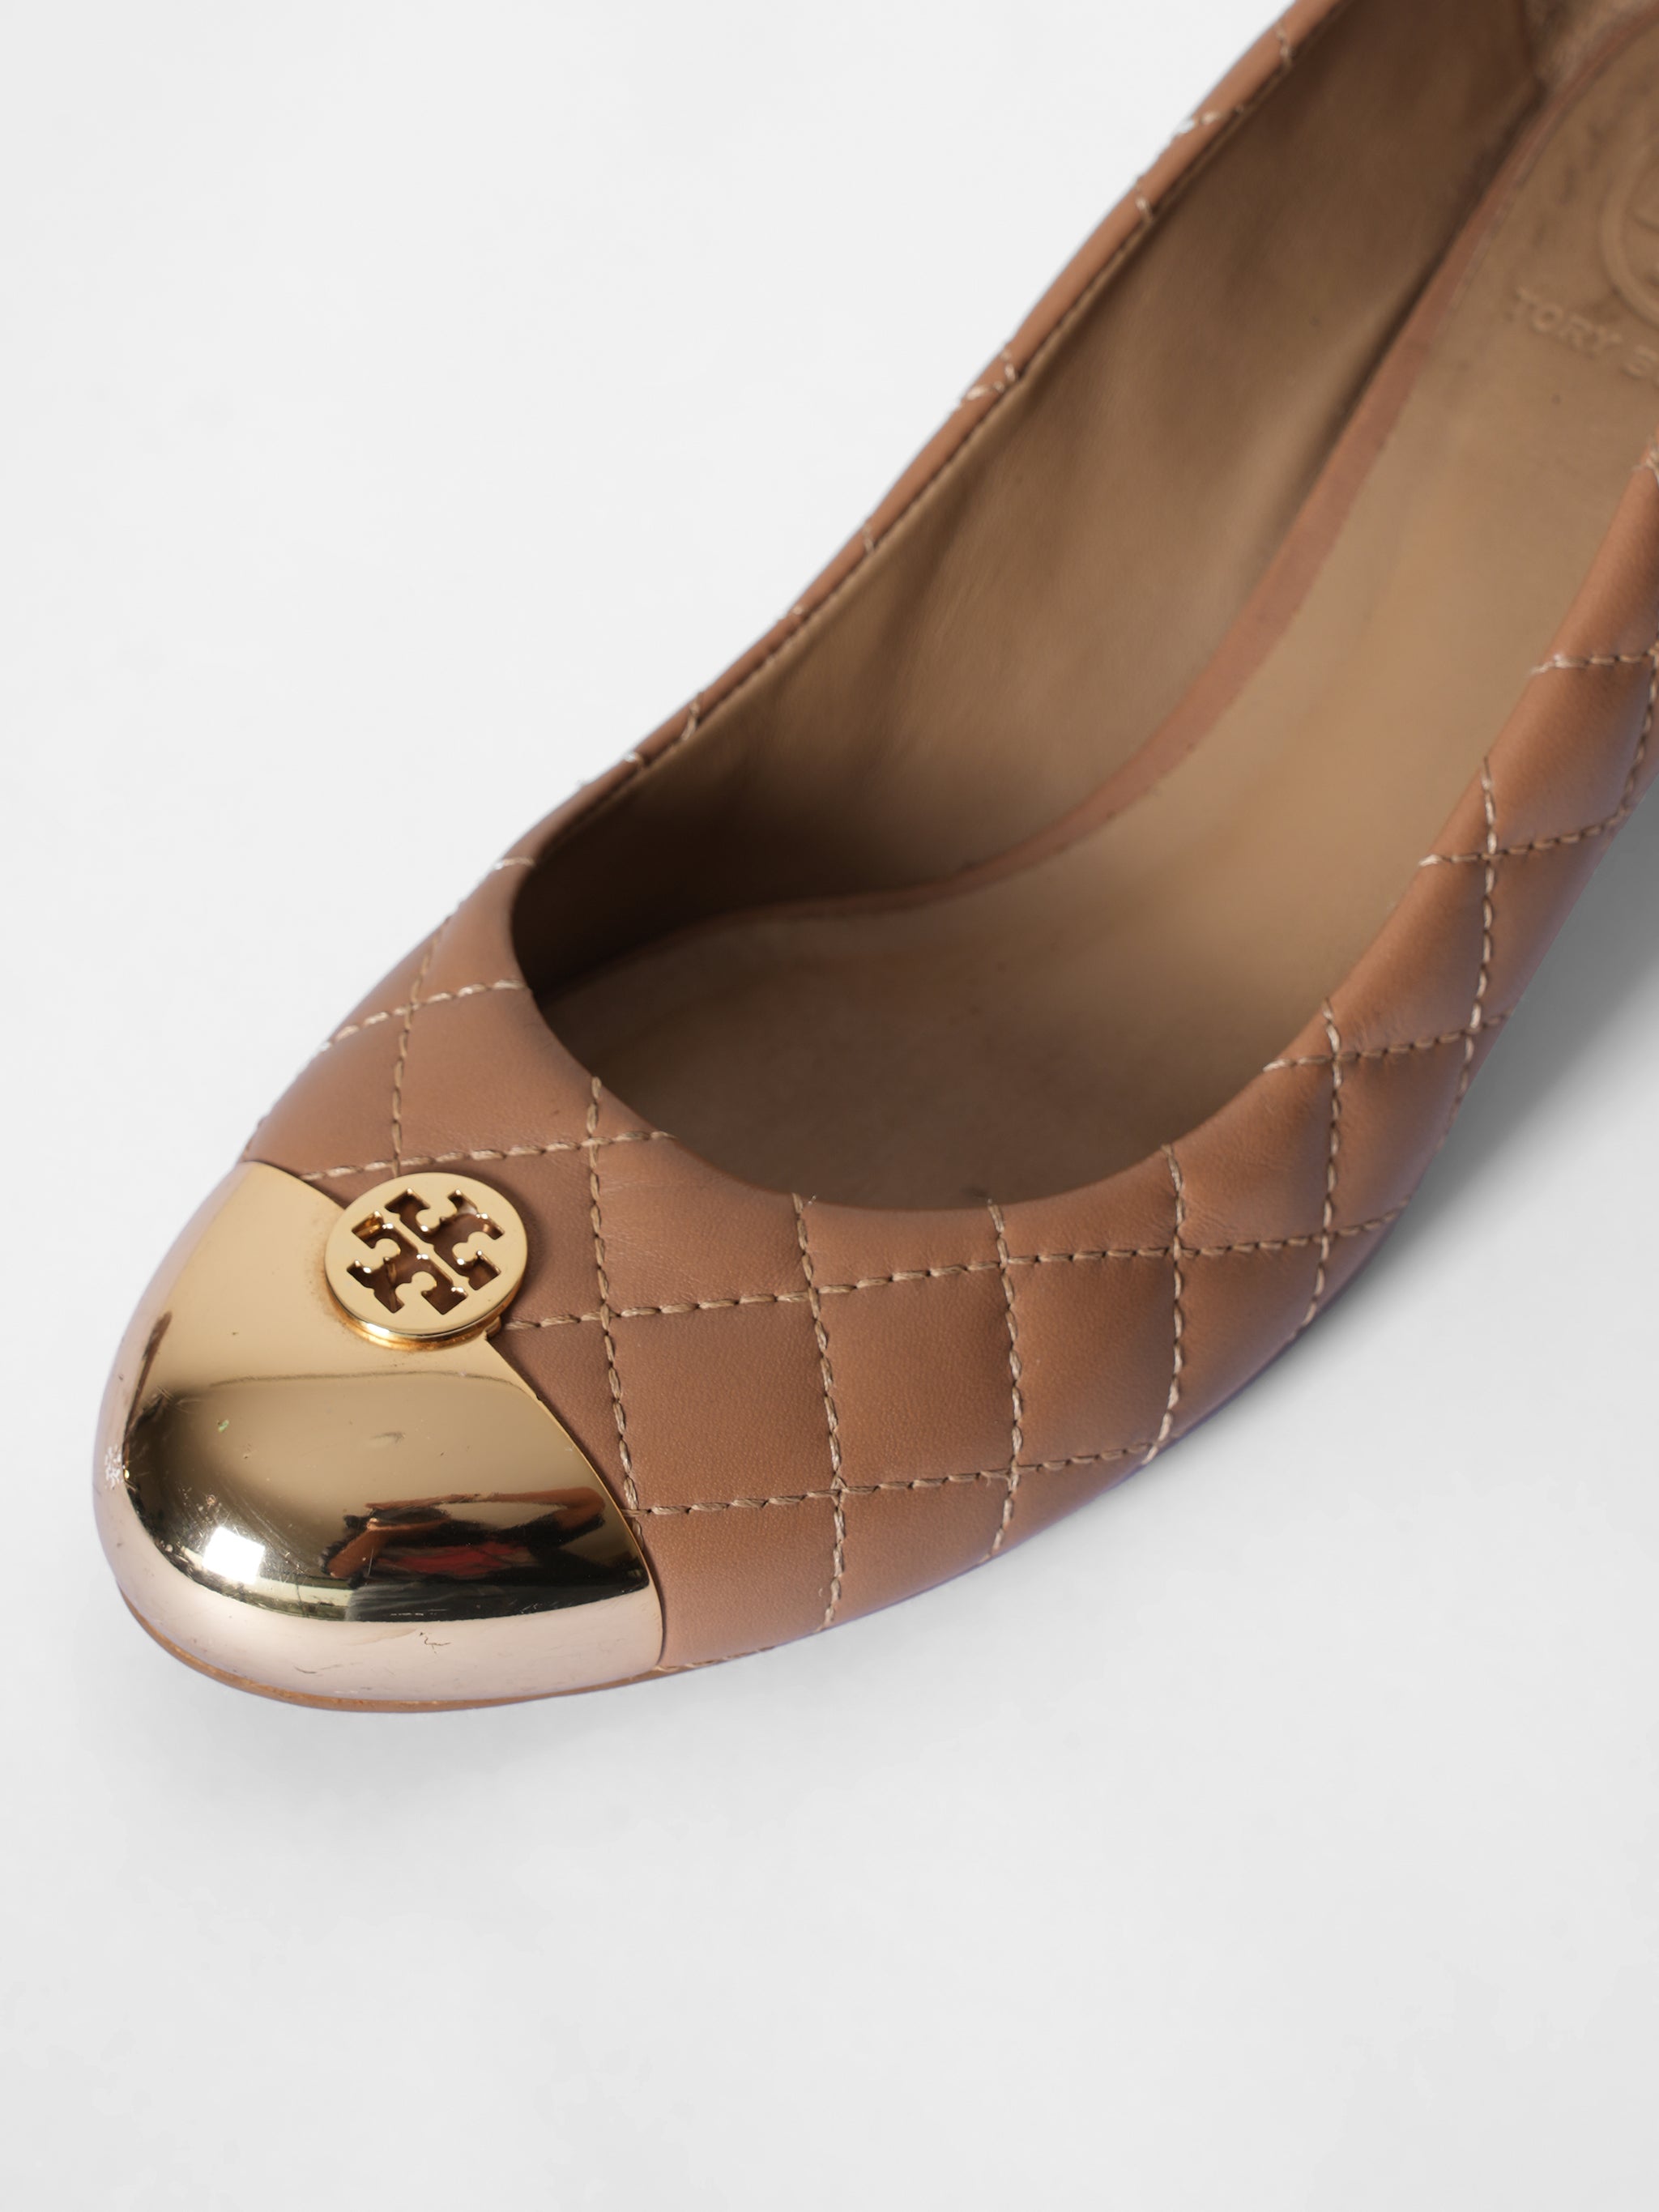 Tory Burch Beige Quilted Leather Kaitlin Cap Toe Pumps